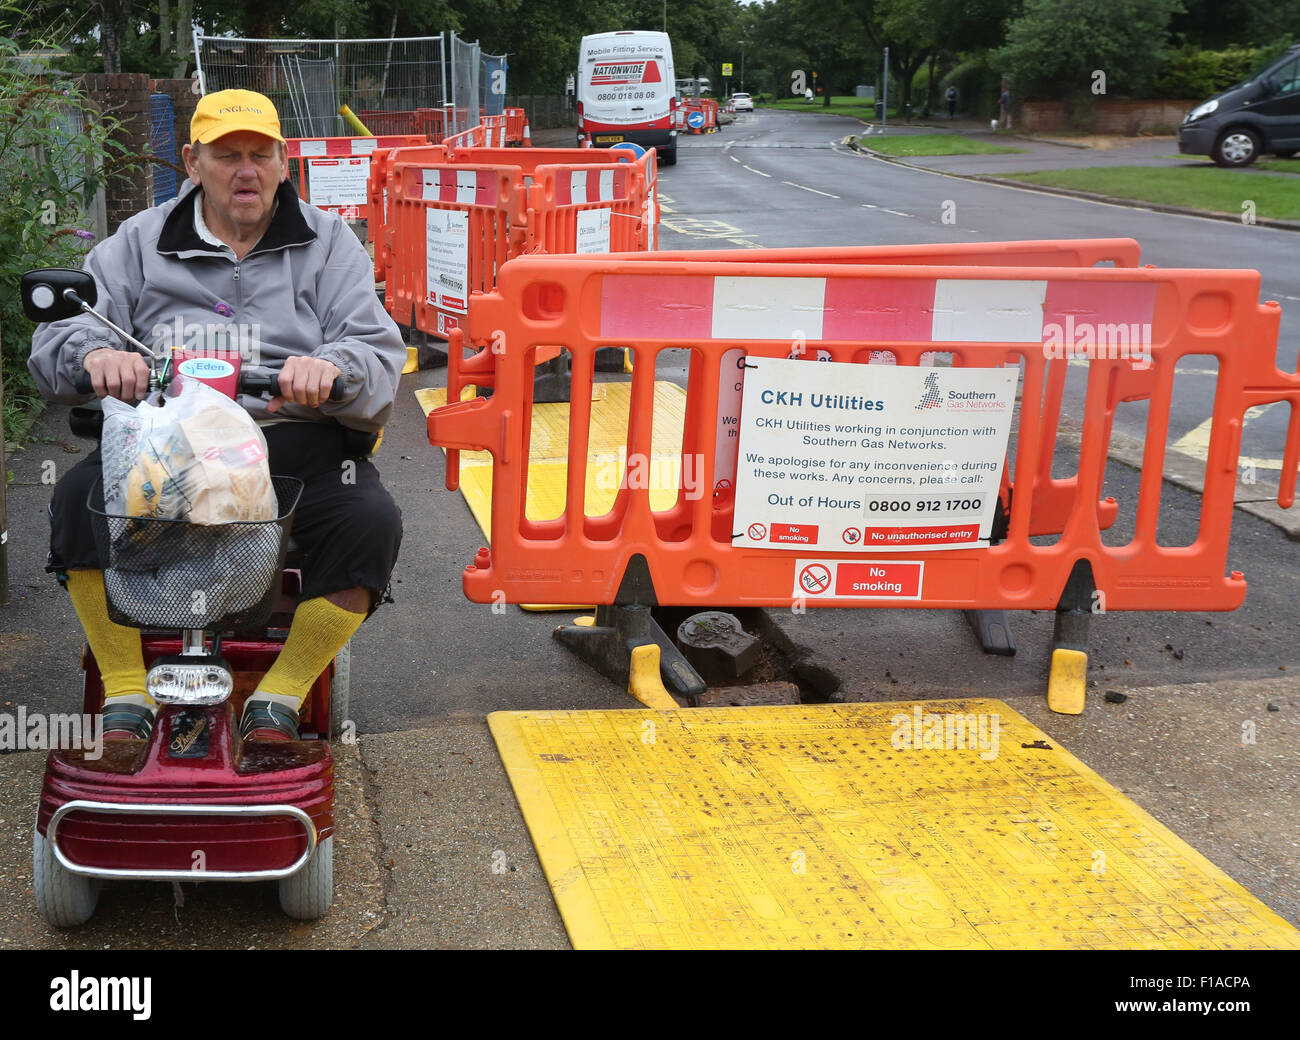 Bridgemary, UK. 31st August, 2015. Gas Works outside  Bedhenham Road Bridgemary  residents were enraged this week after a three-month gas  main replacement project began outside a primary school in the first week of term.  Southern Gas Network contractors where  due to begin the project in Bridgemary on August 7, but delays meant the road did not start to be dug up until August 20   The scheme has been installing new gas main from Bramer Road to  the junction of the Bridgemary Avenue  close to The Bedenham Primary School. Pictured: Resident Michael Bradbury. Credit: UKNIP / Alamy Live News Stock Photo